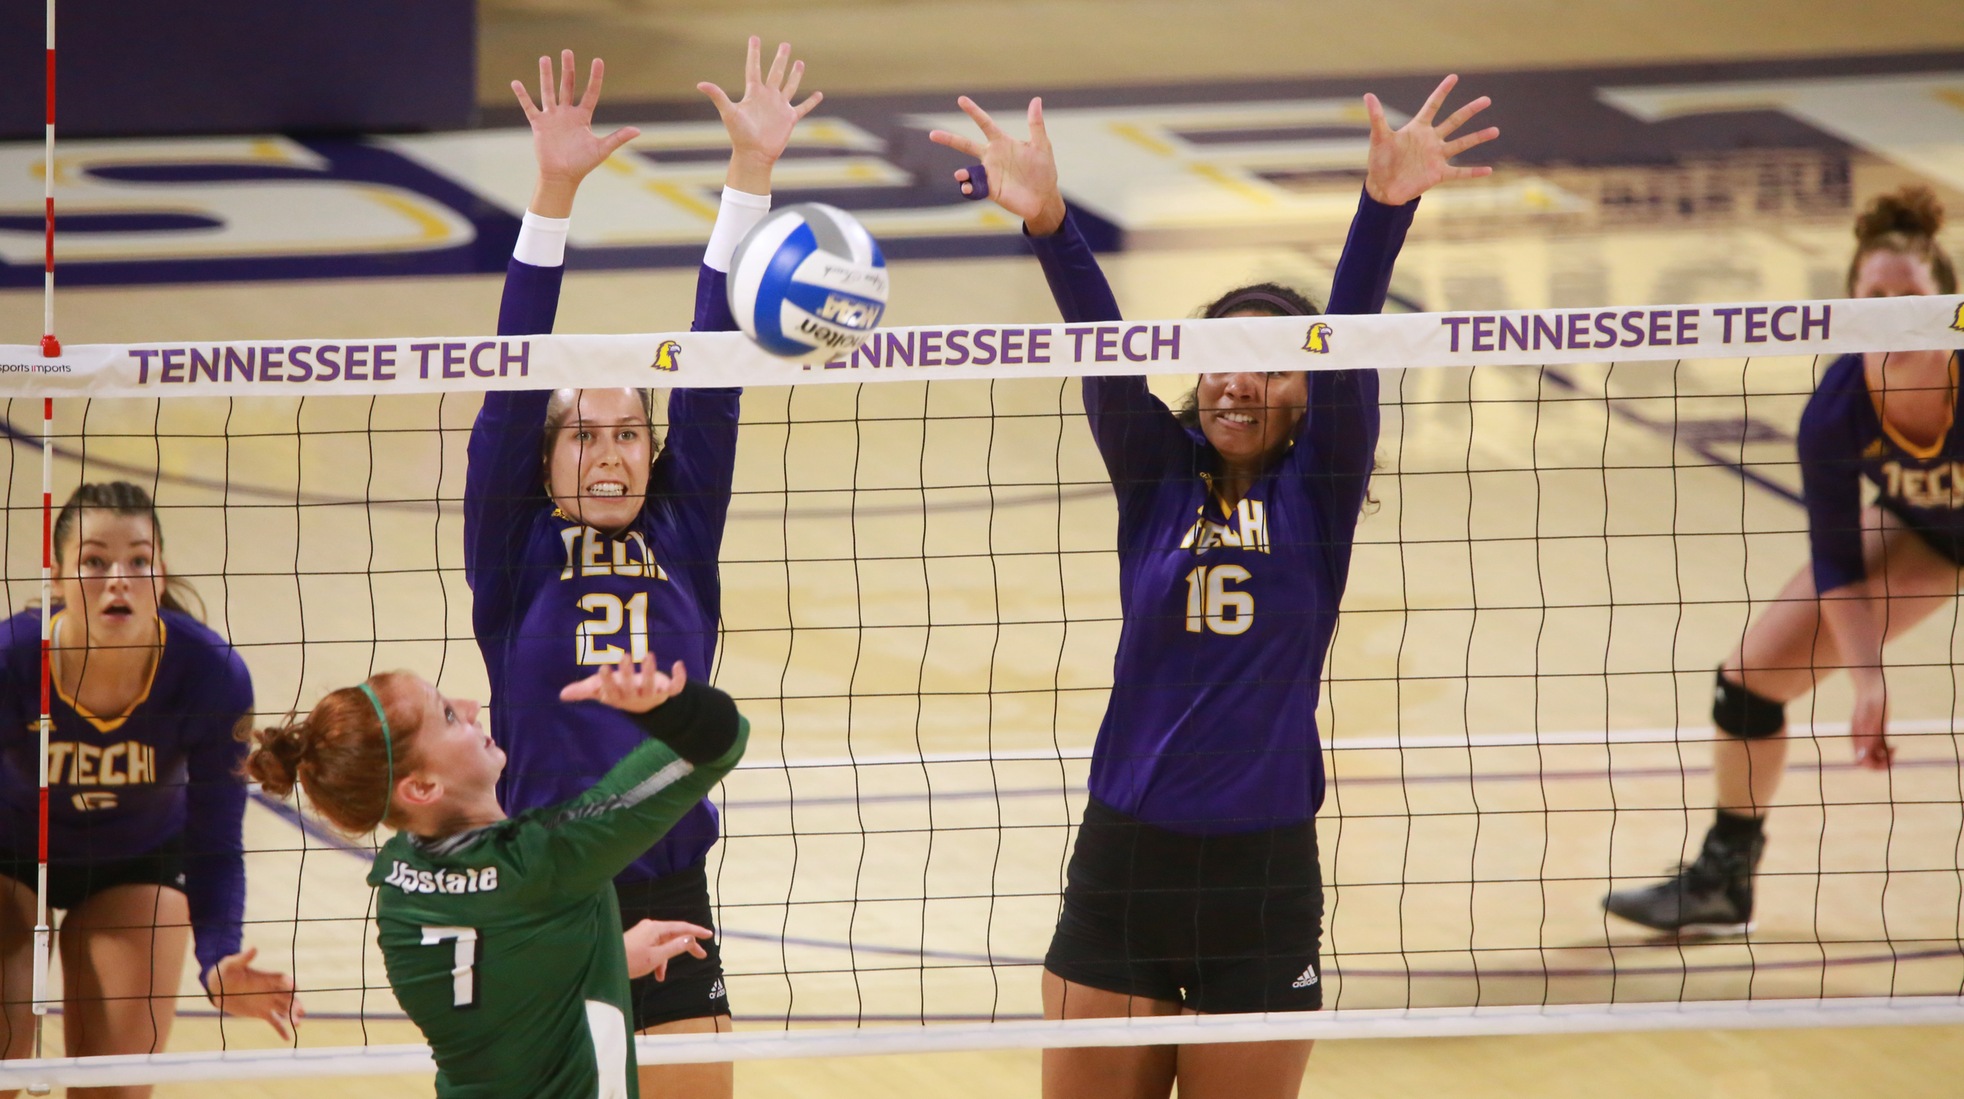 TTU volleyball welcomes Chattanooga in nonconference match Tuesday night